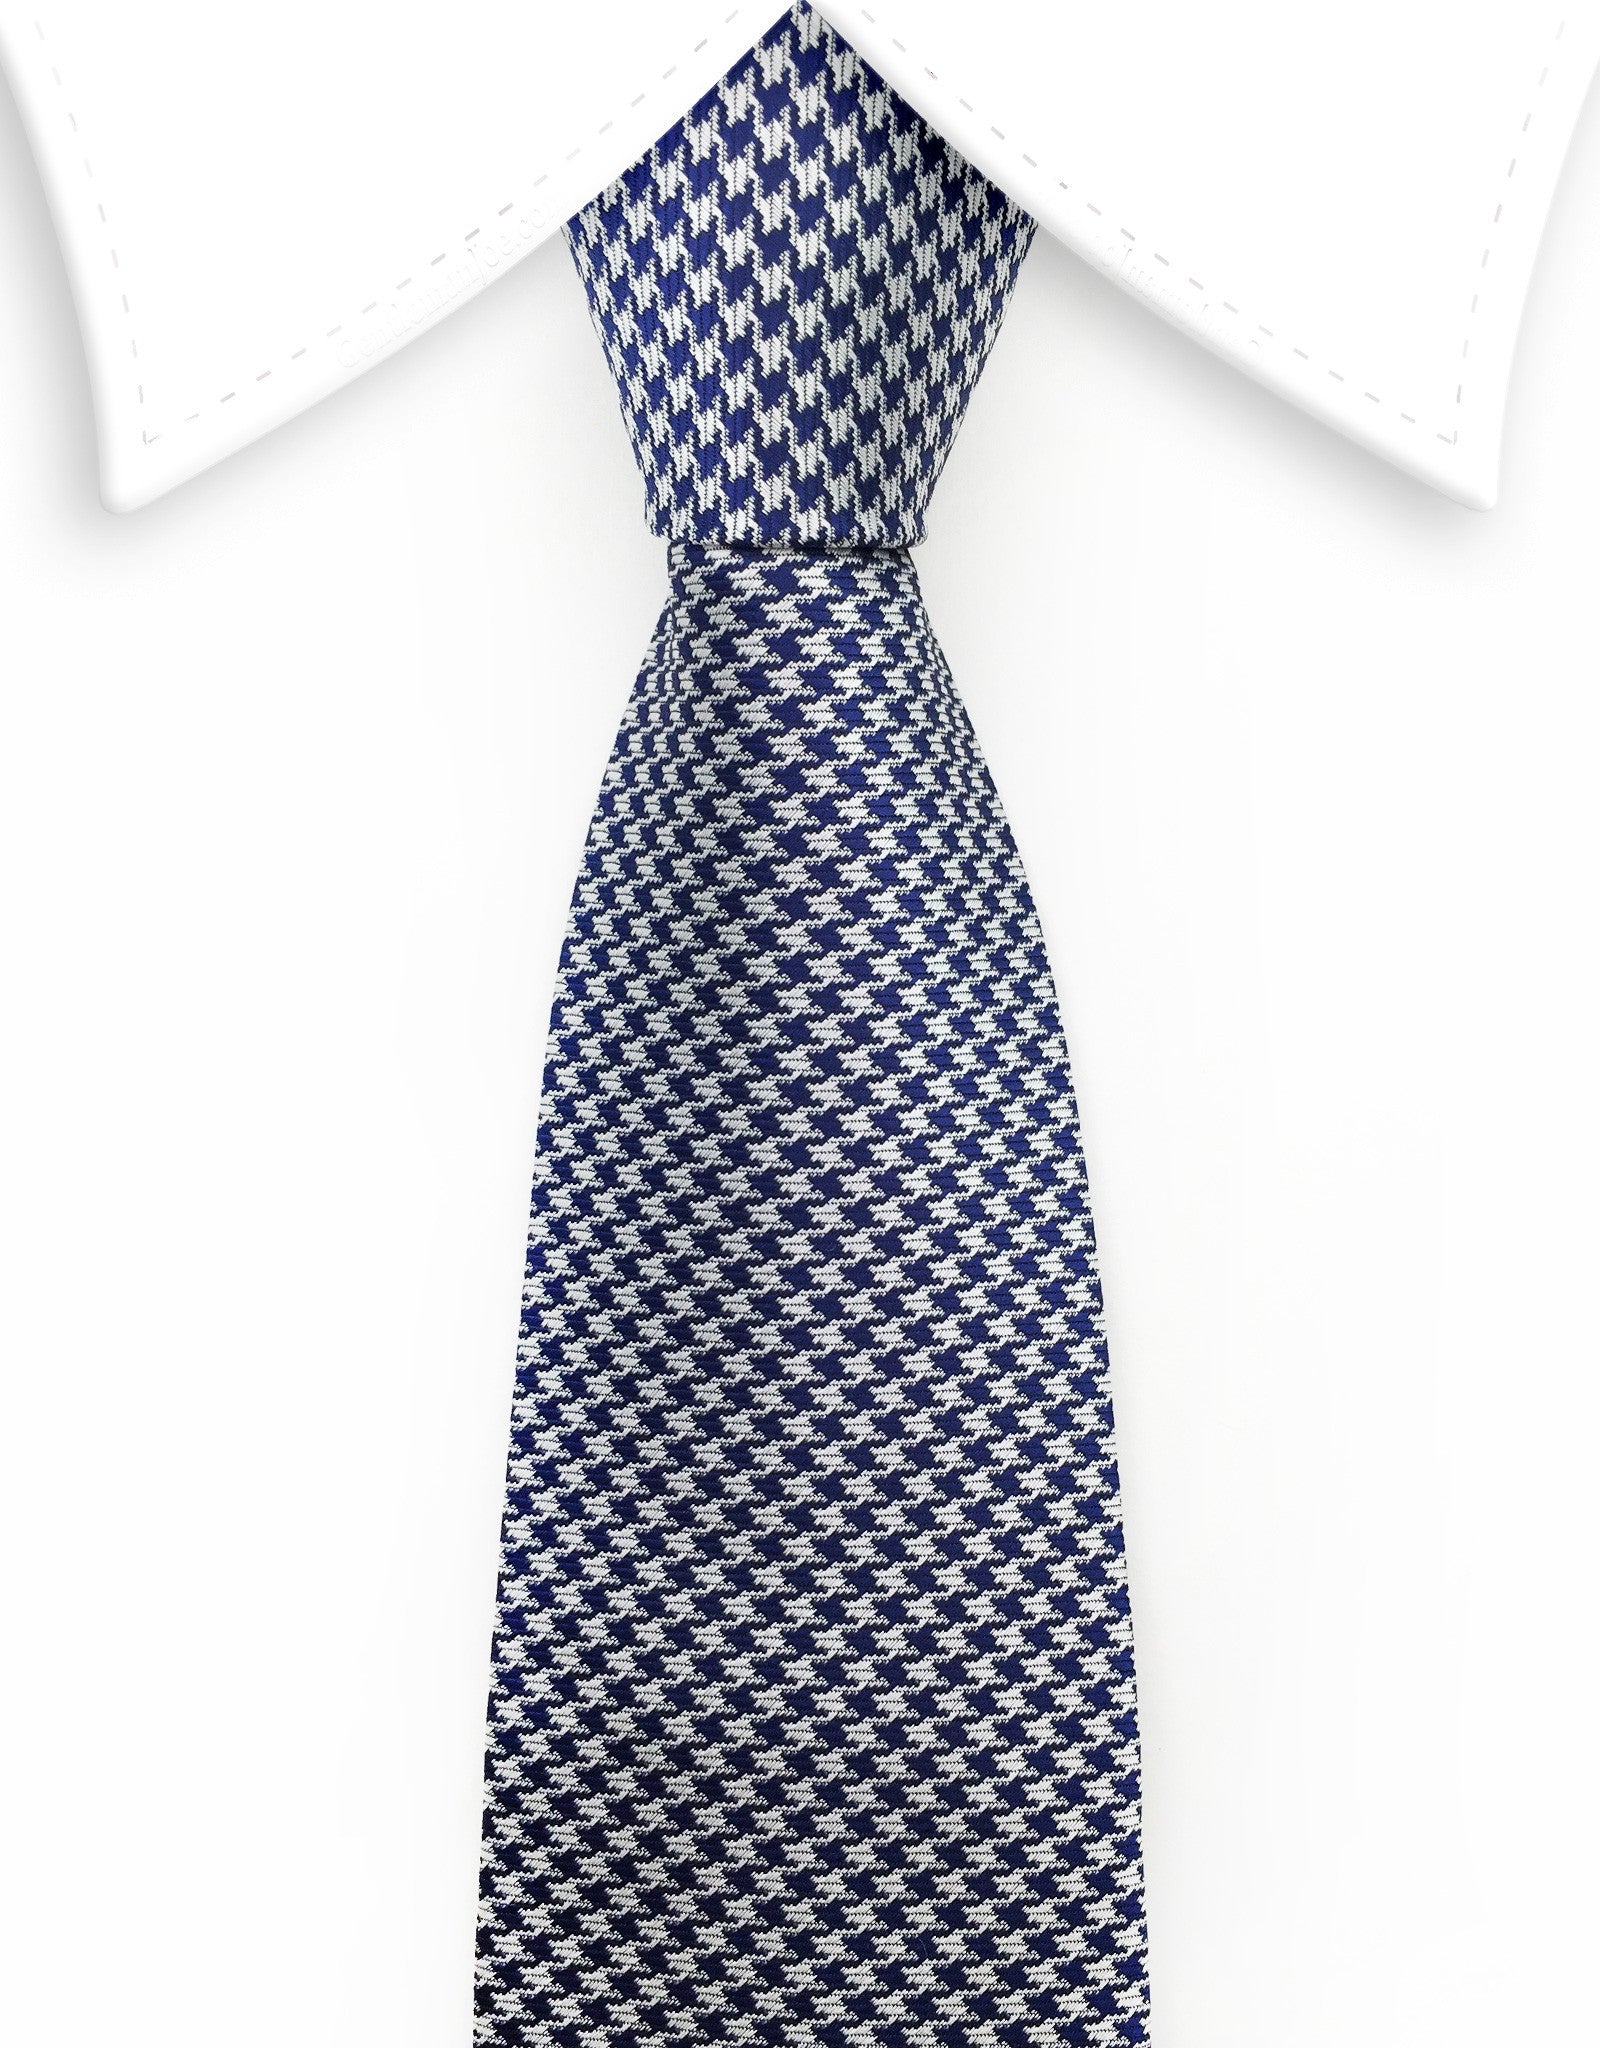 Navy blue and silver houndstooth tie